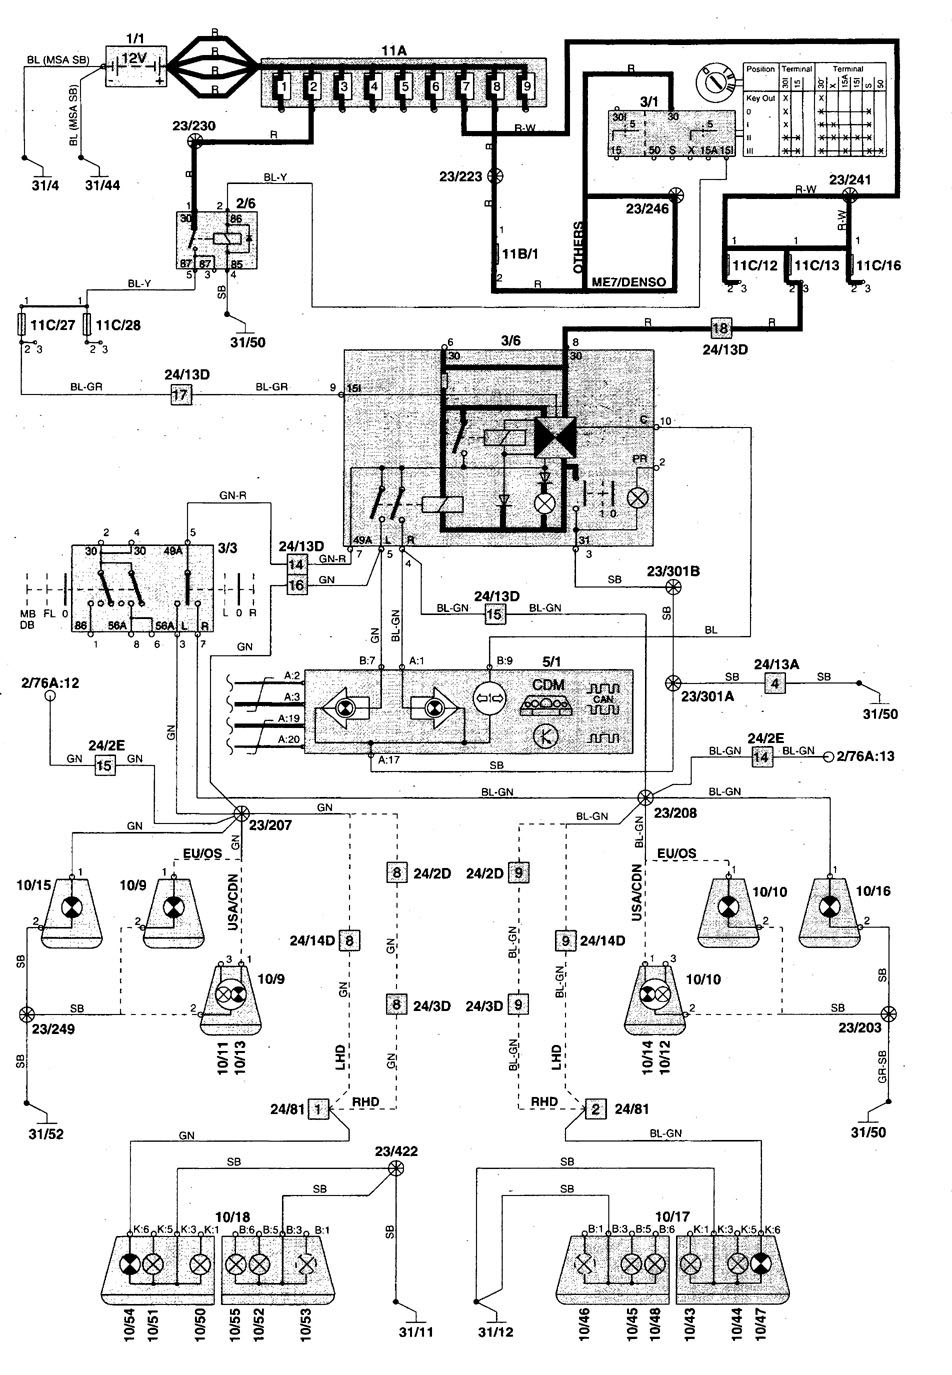 Ford Tractor 1984 1310 Tractor Starter Solenoid Wiring Diagram from schematron.org